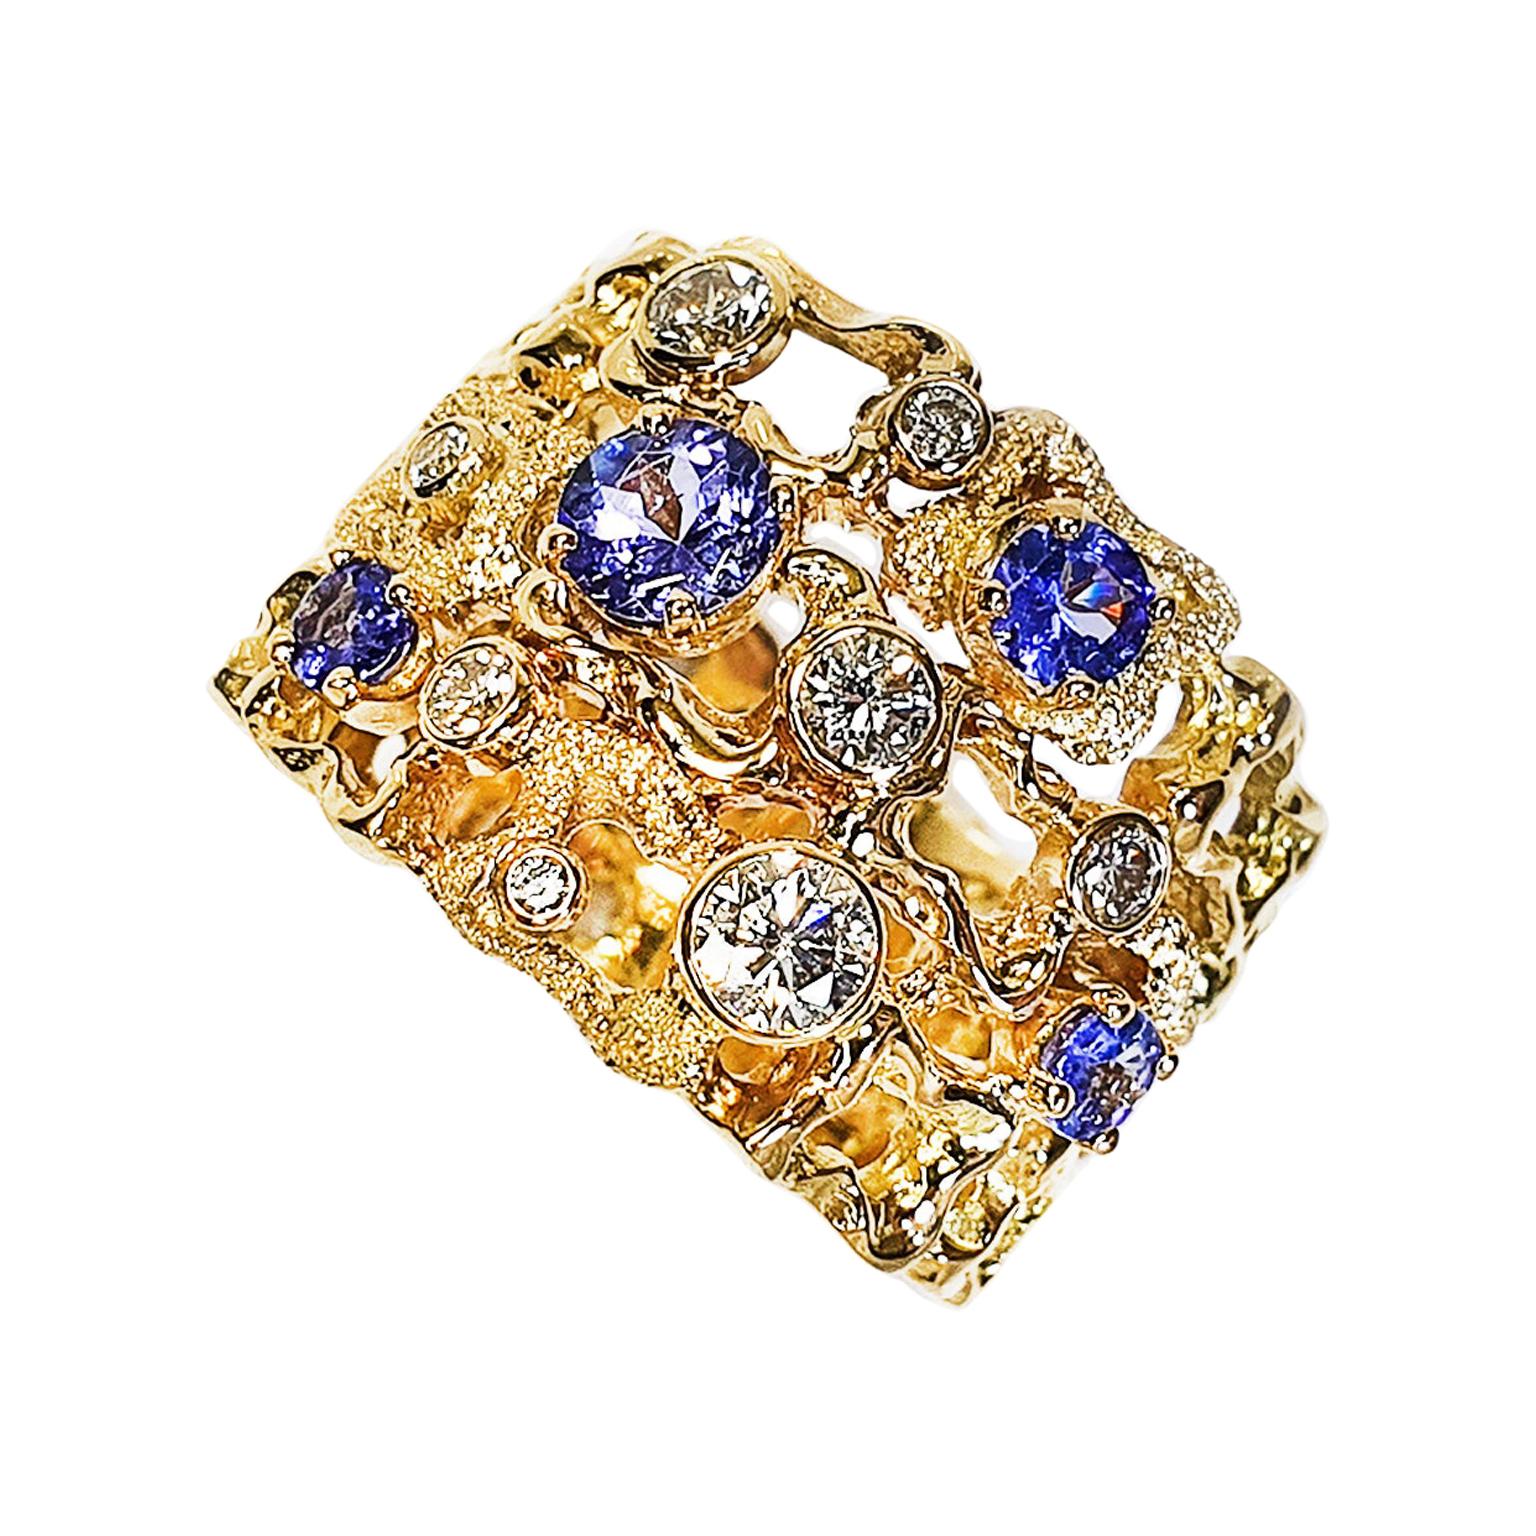 Paul Amey 18k Gold, Diamond and Tanzanite Dress Ring For Sale